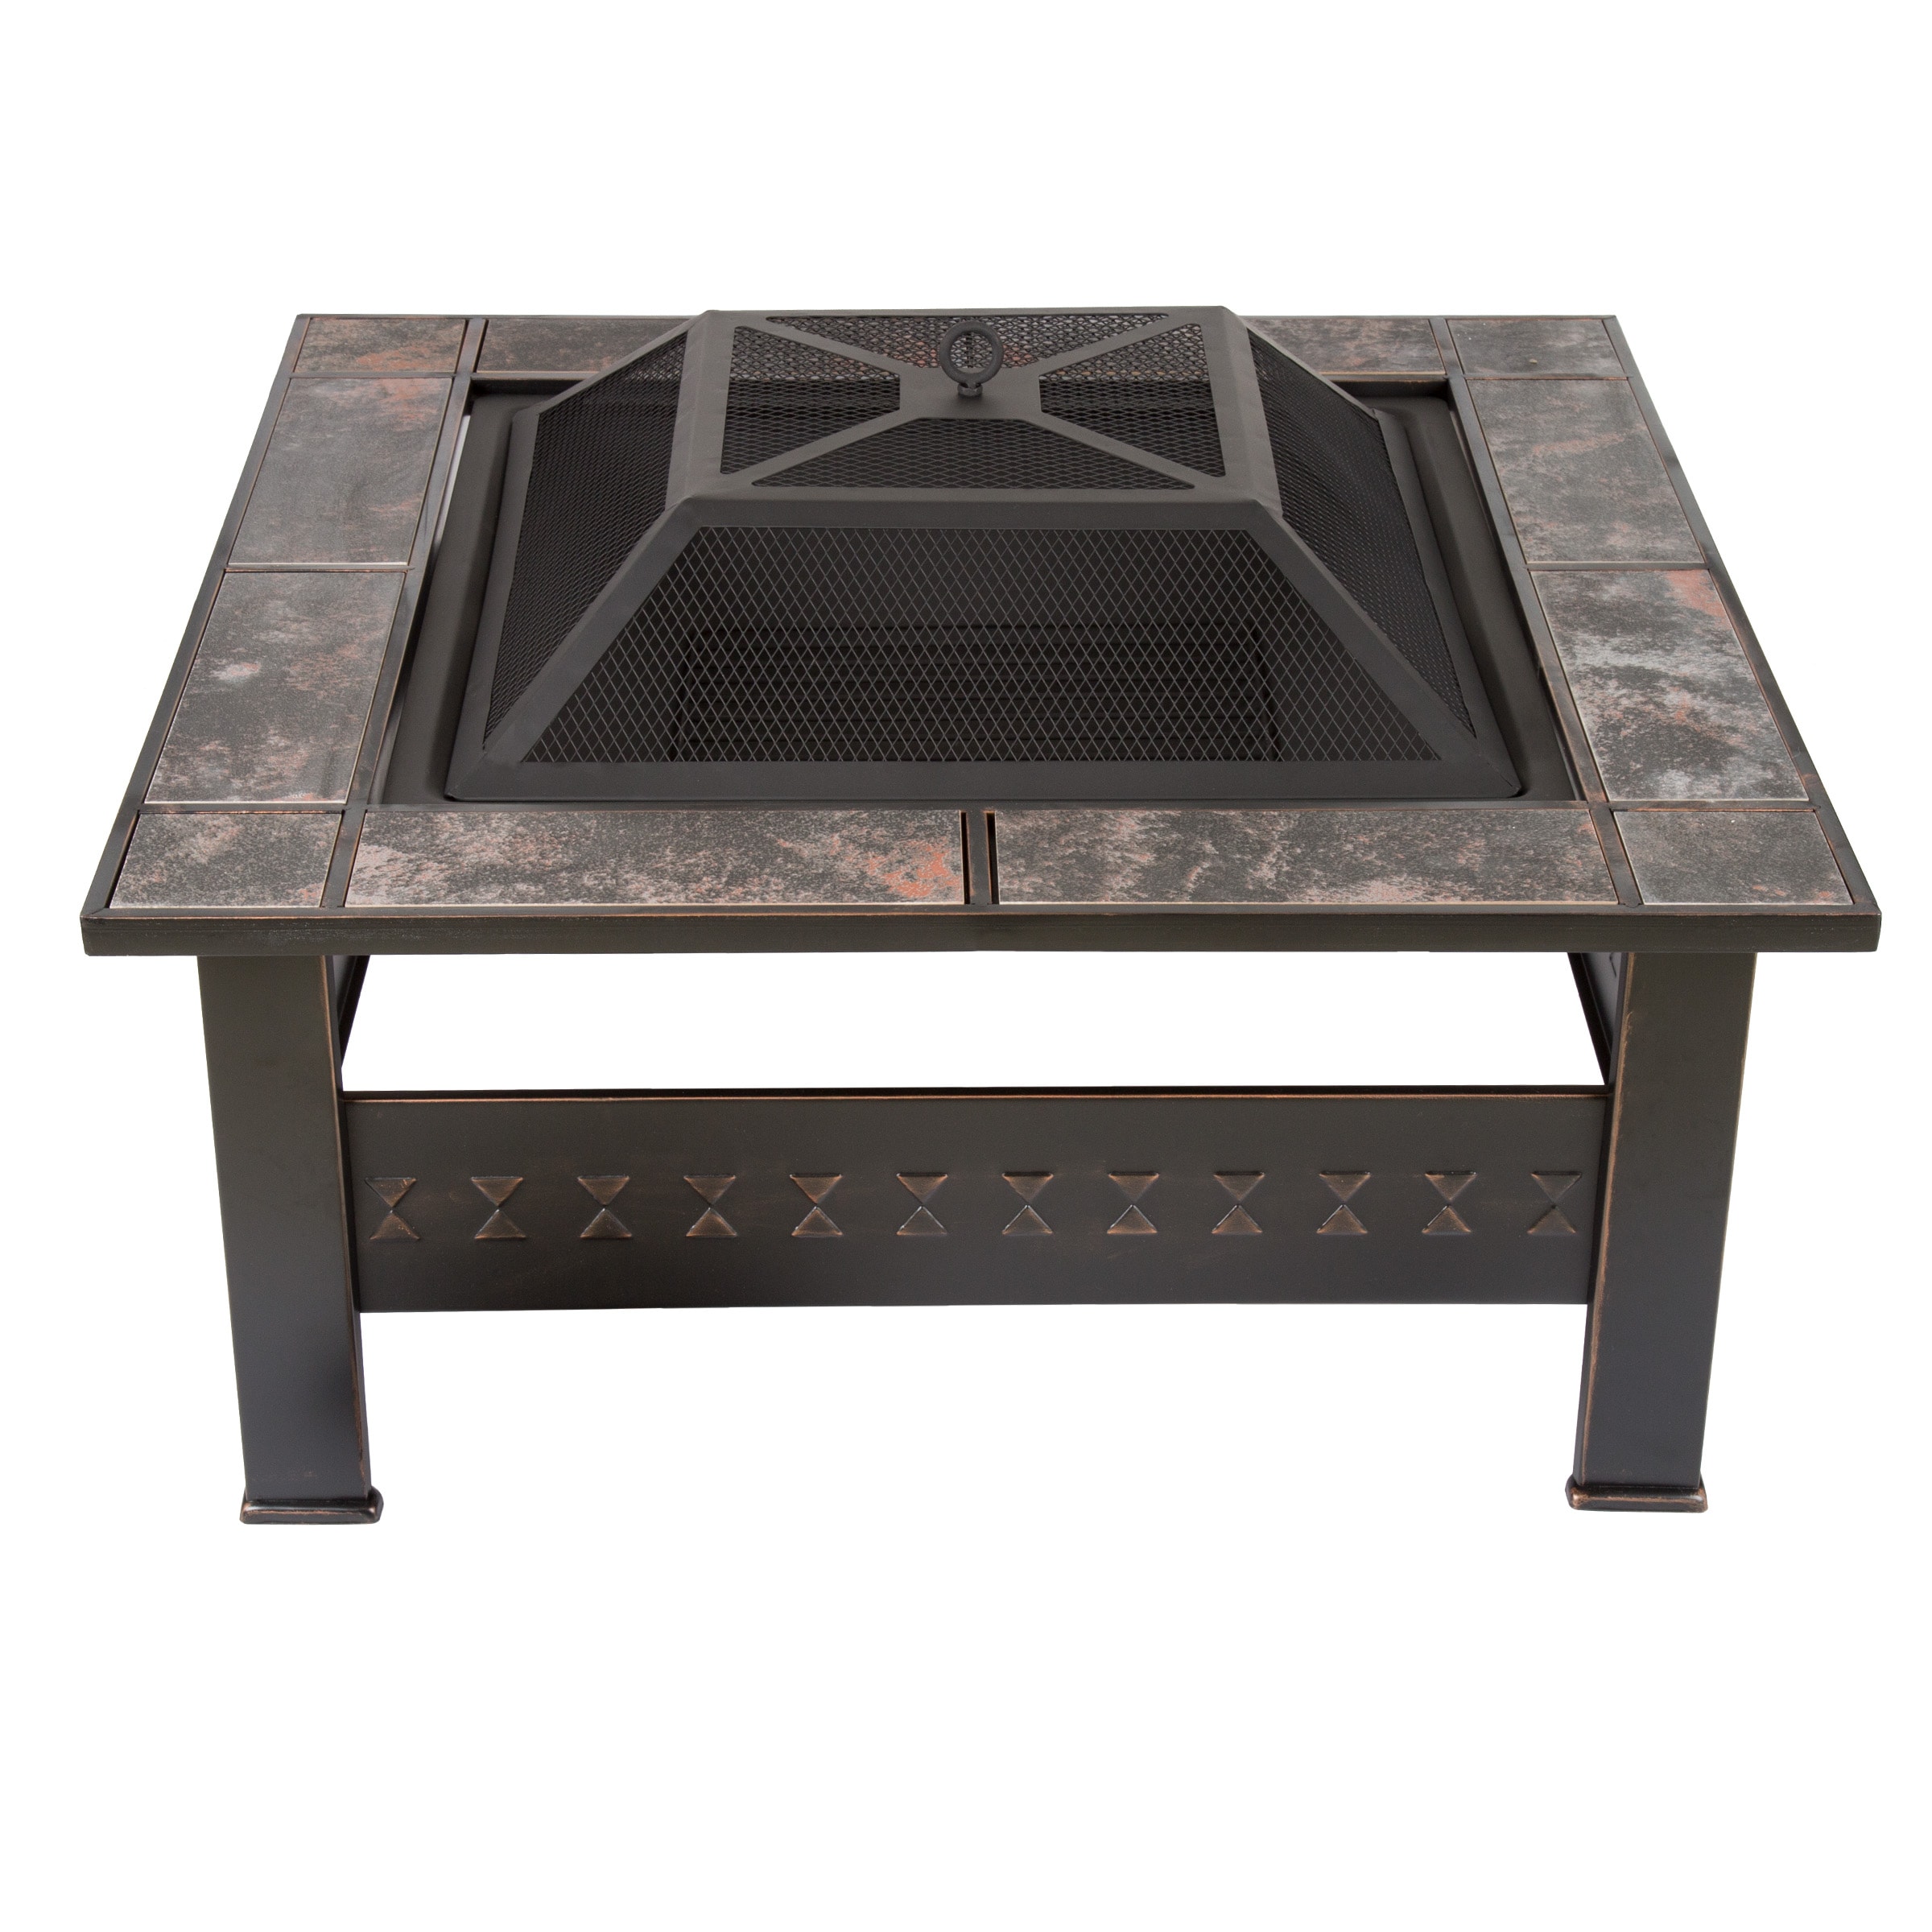 Steel Wood Burning Fire Pit, Wood Burning Fire Pit Table And Chairs